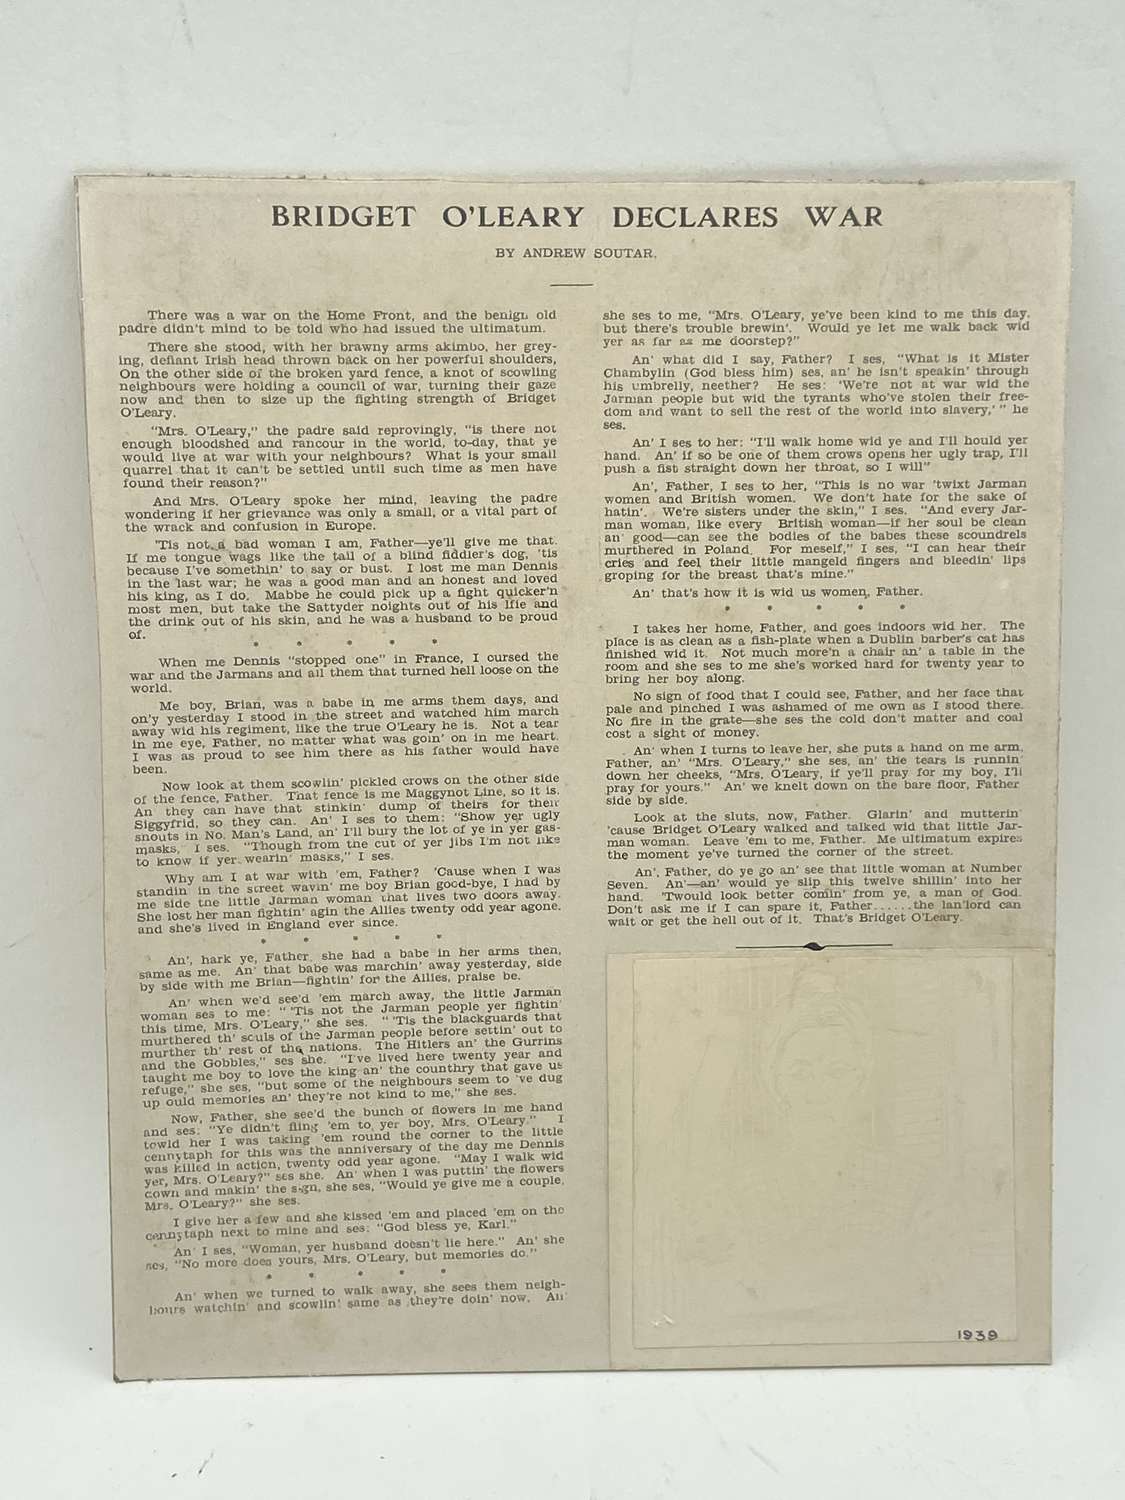 WW2 British Home Front Bridget O’Leary Declares War 1939 Article